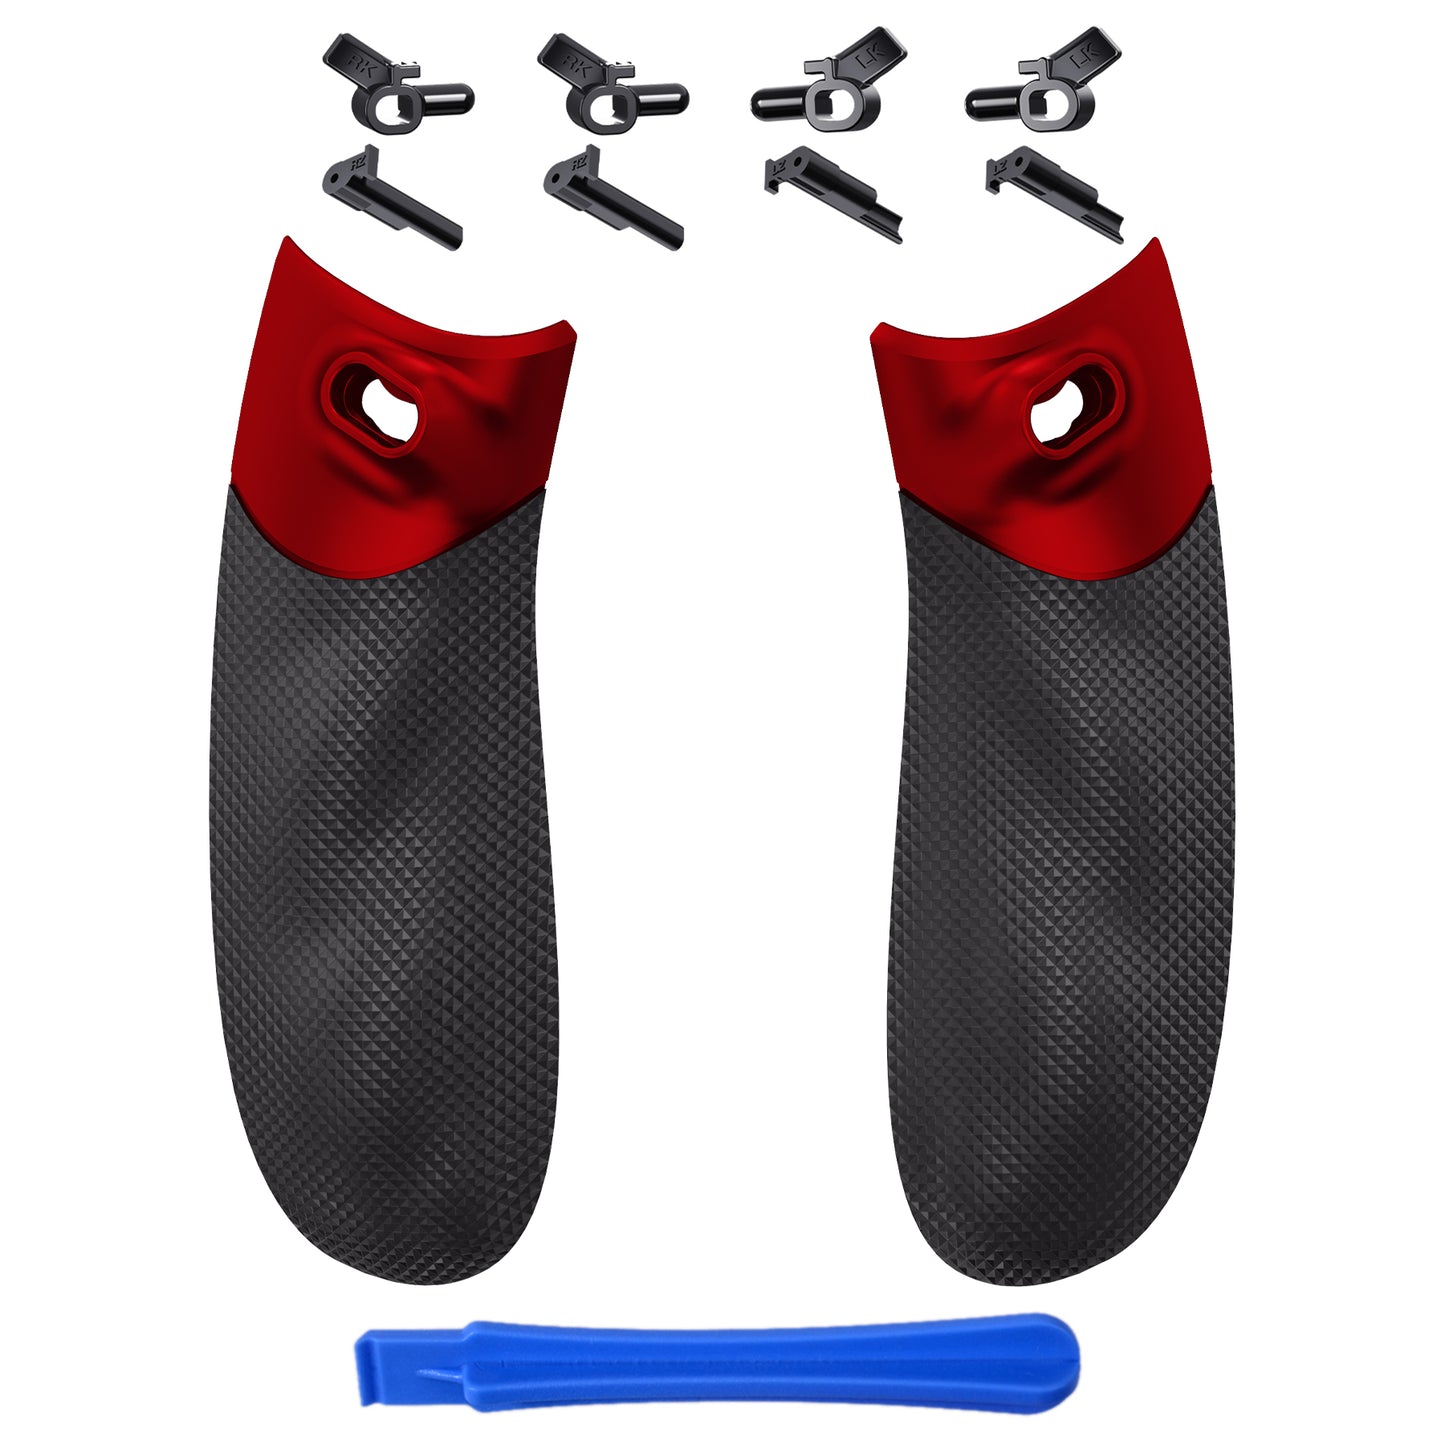 eXtremeRate Retail Scarlet Red FLEXOR Rubberized Side Rails Grips Trigger Stop Kit for Xbox Series X/S Controller, Anti-Slip Ergonomic Trigger Stopper Handle Grips for Xbox Core Controller - Diamond Textured - PX3Q3003